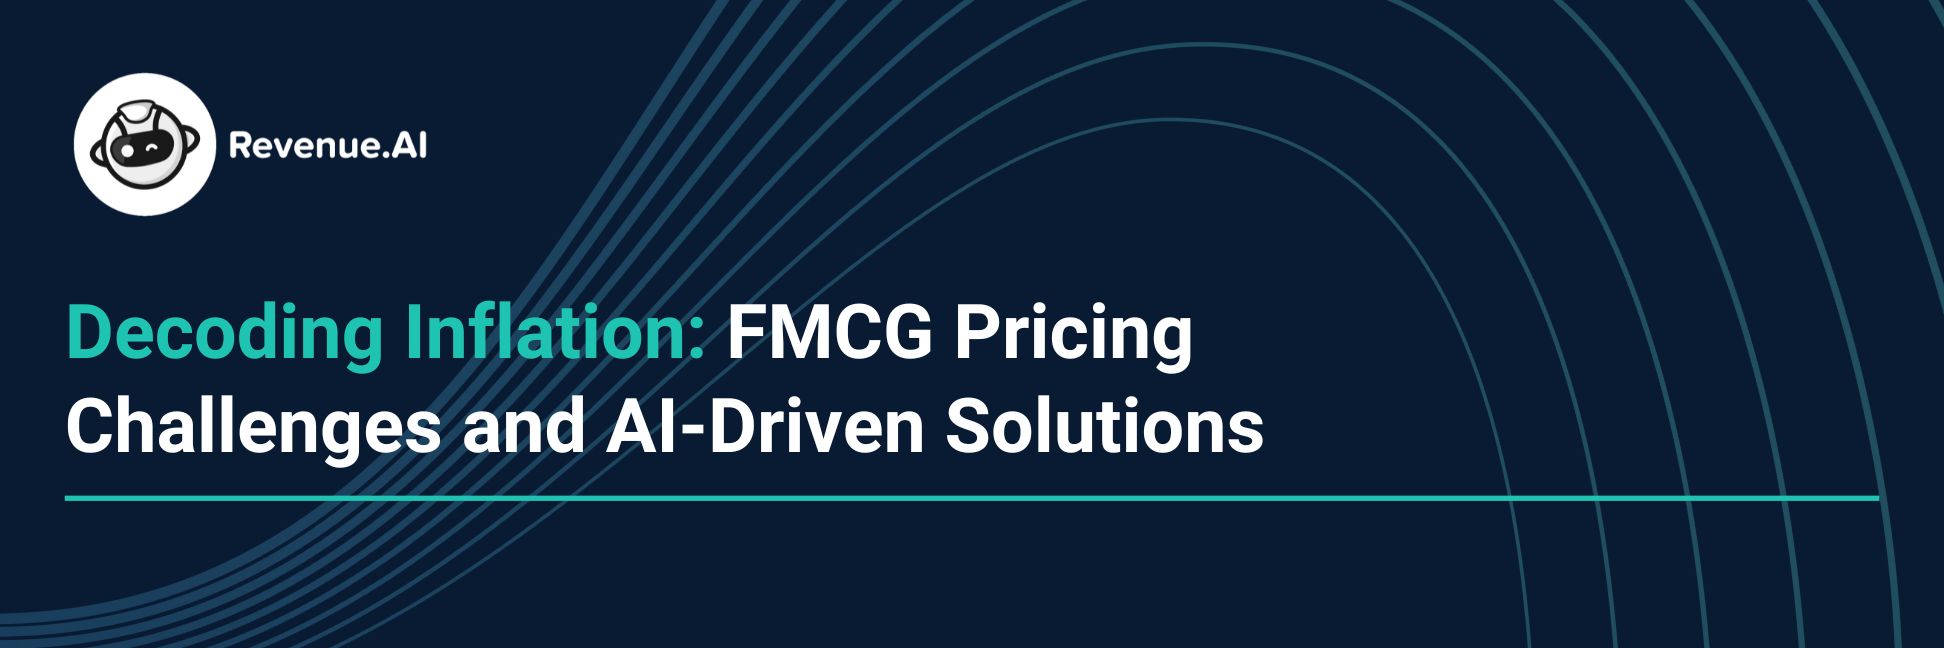 Decoding Inflation: FMCG Pricing Challenges and AI-Driven Solutions